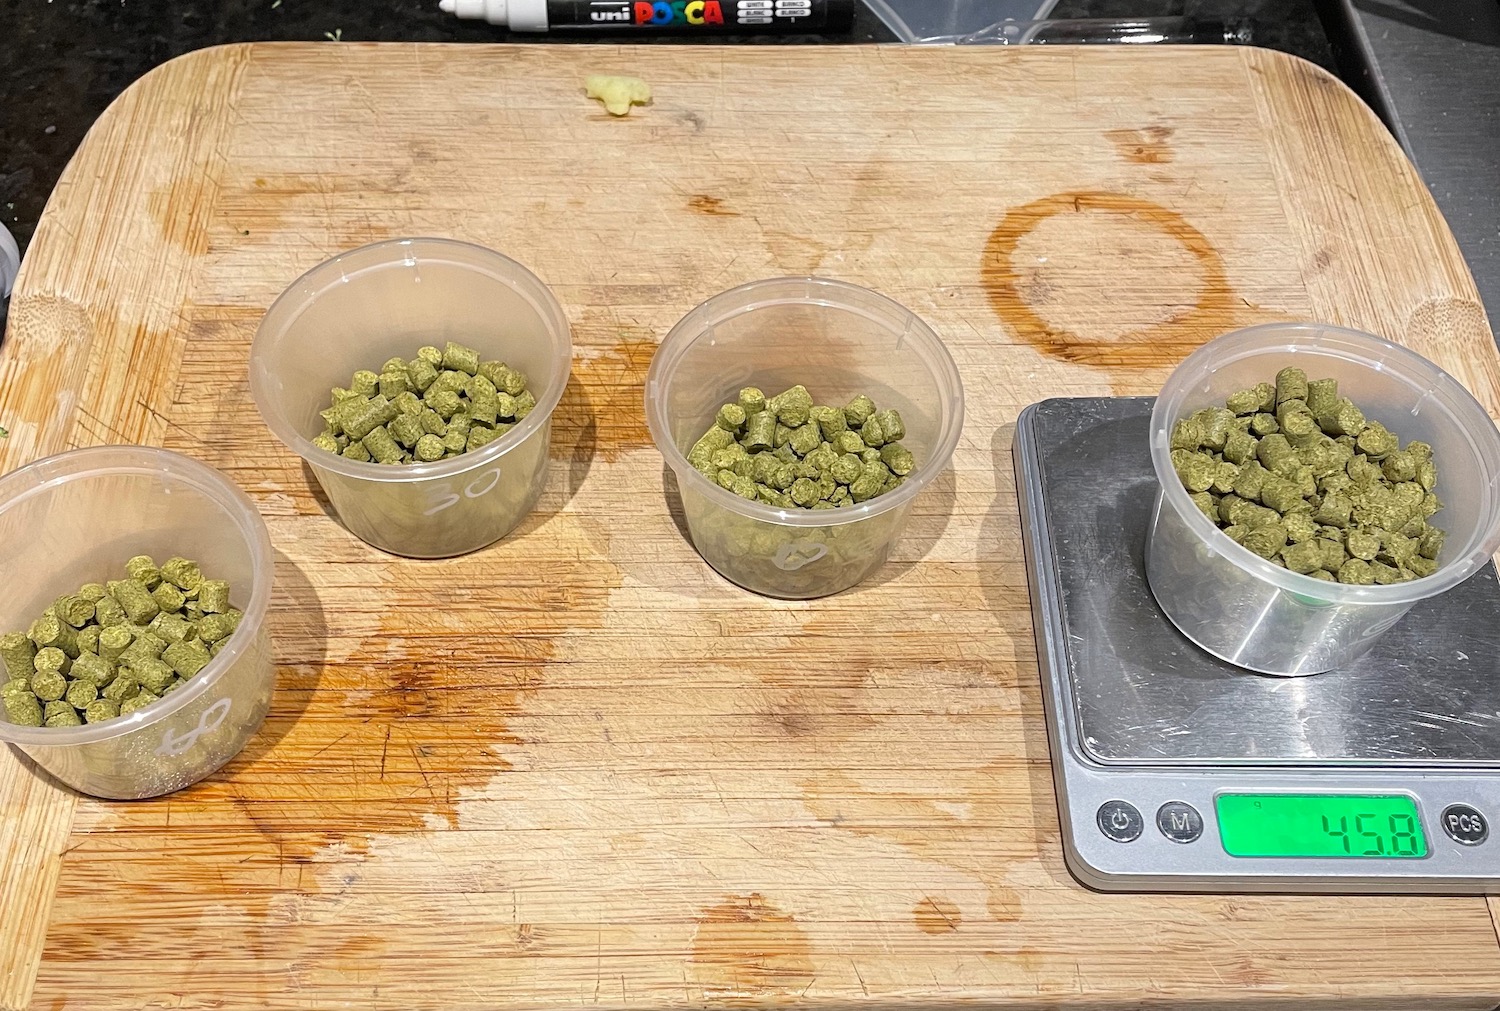 Hop additions measured out